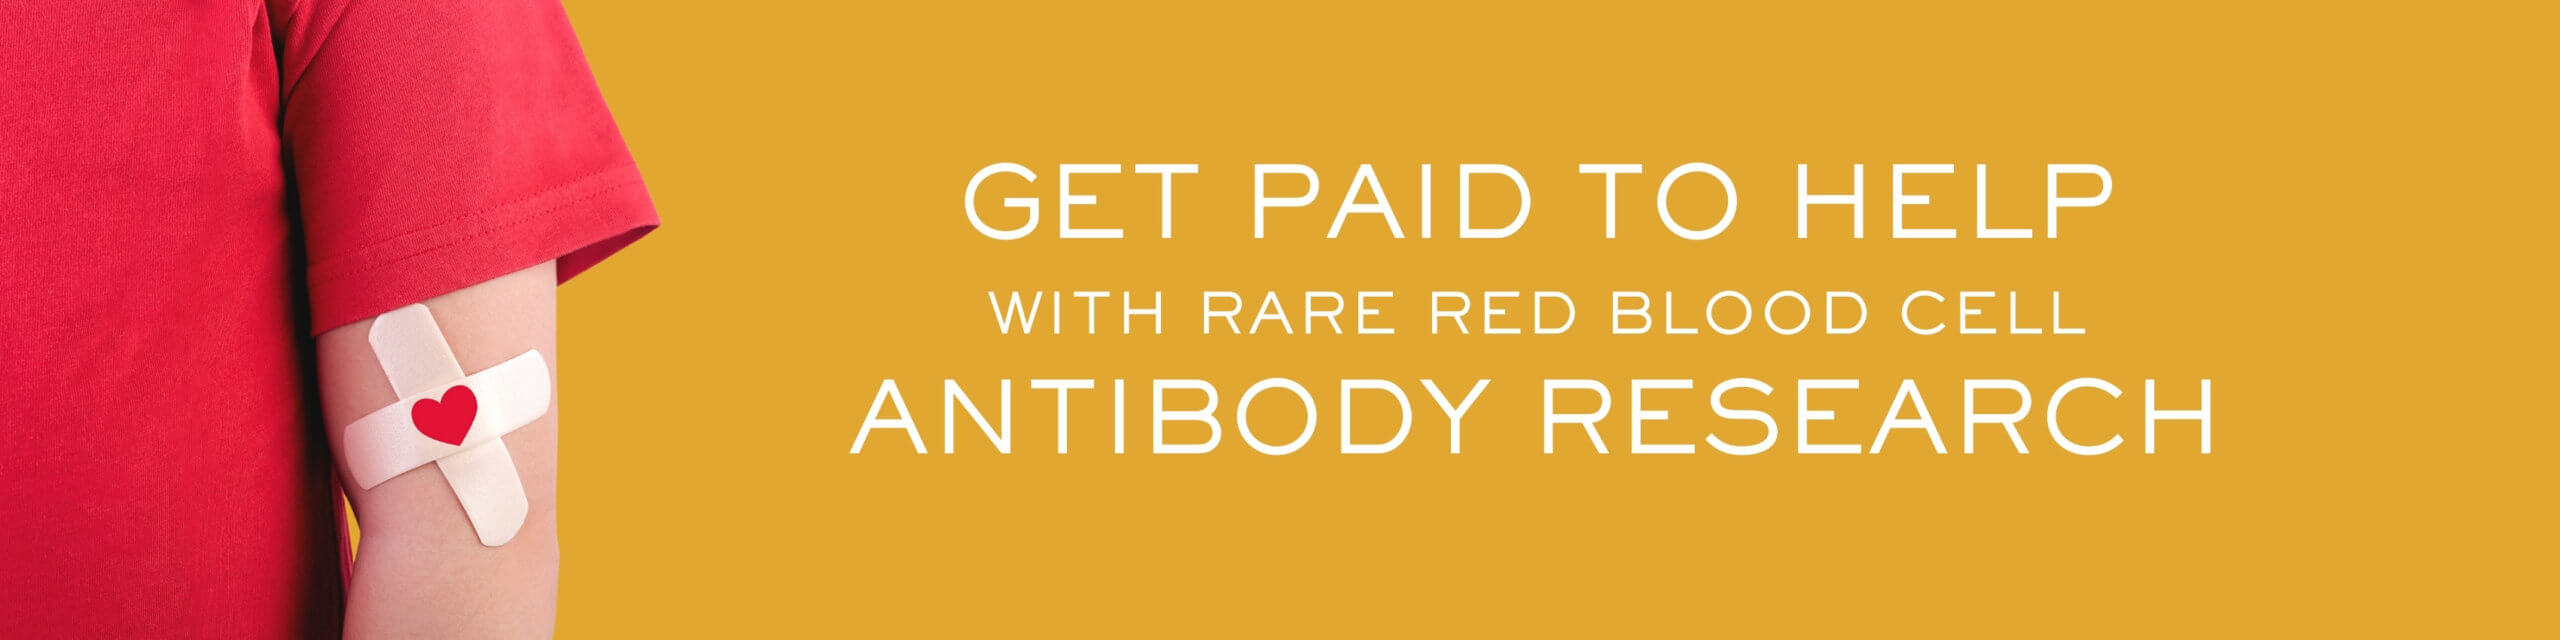 Help with rare red blood cell antibody research